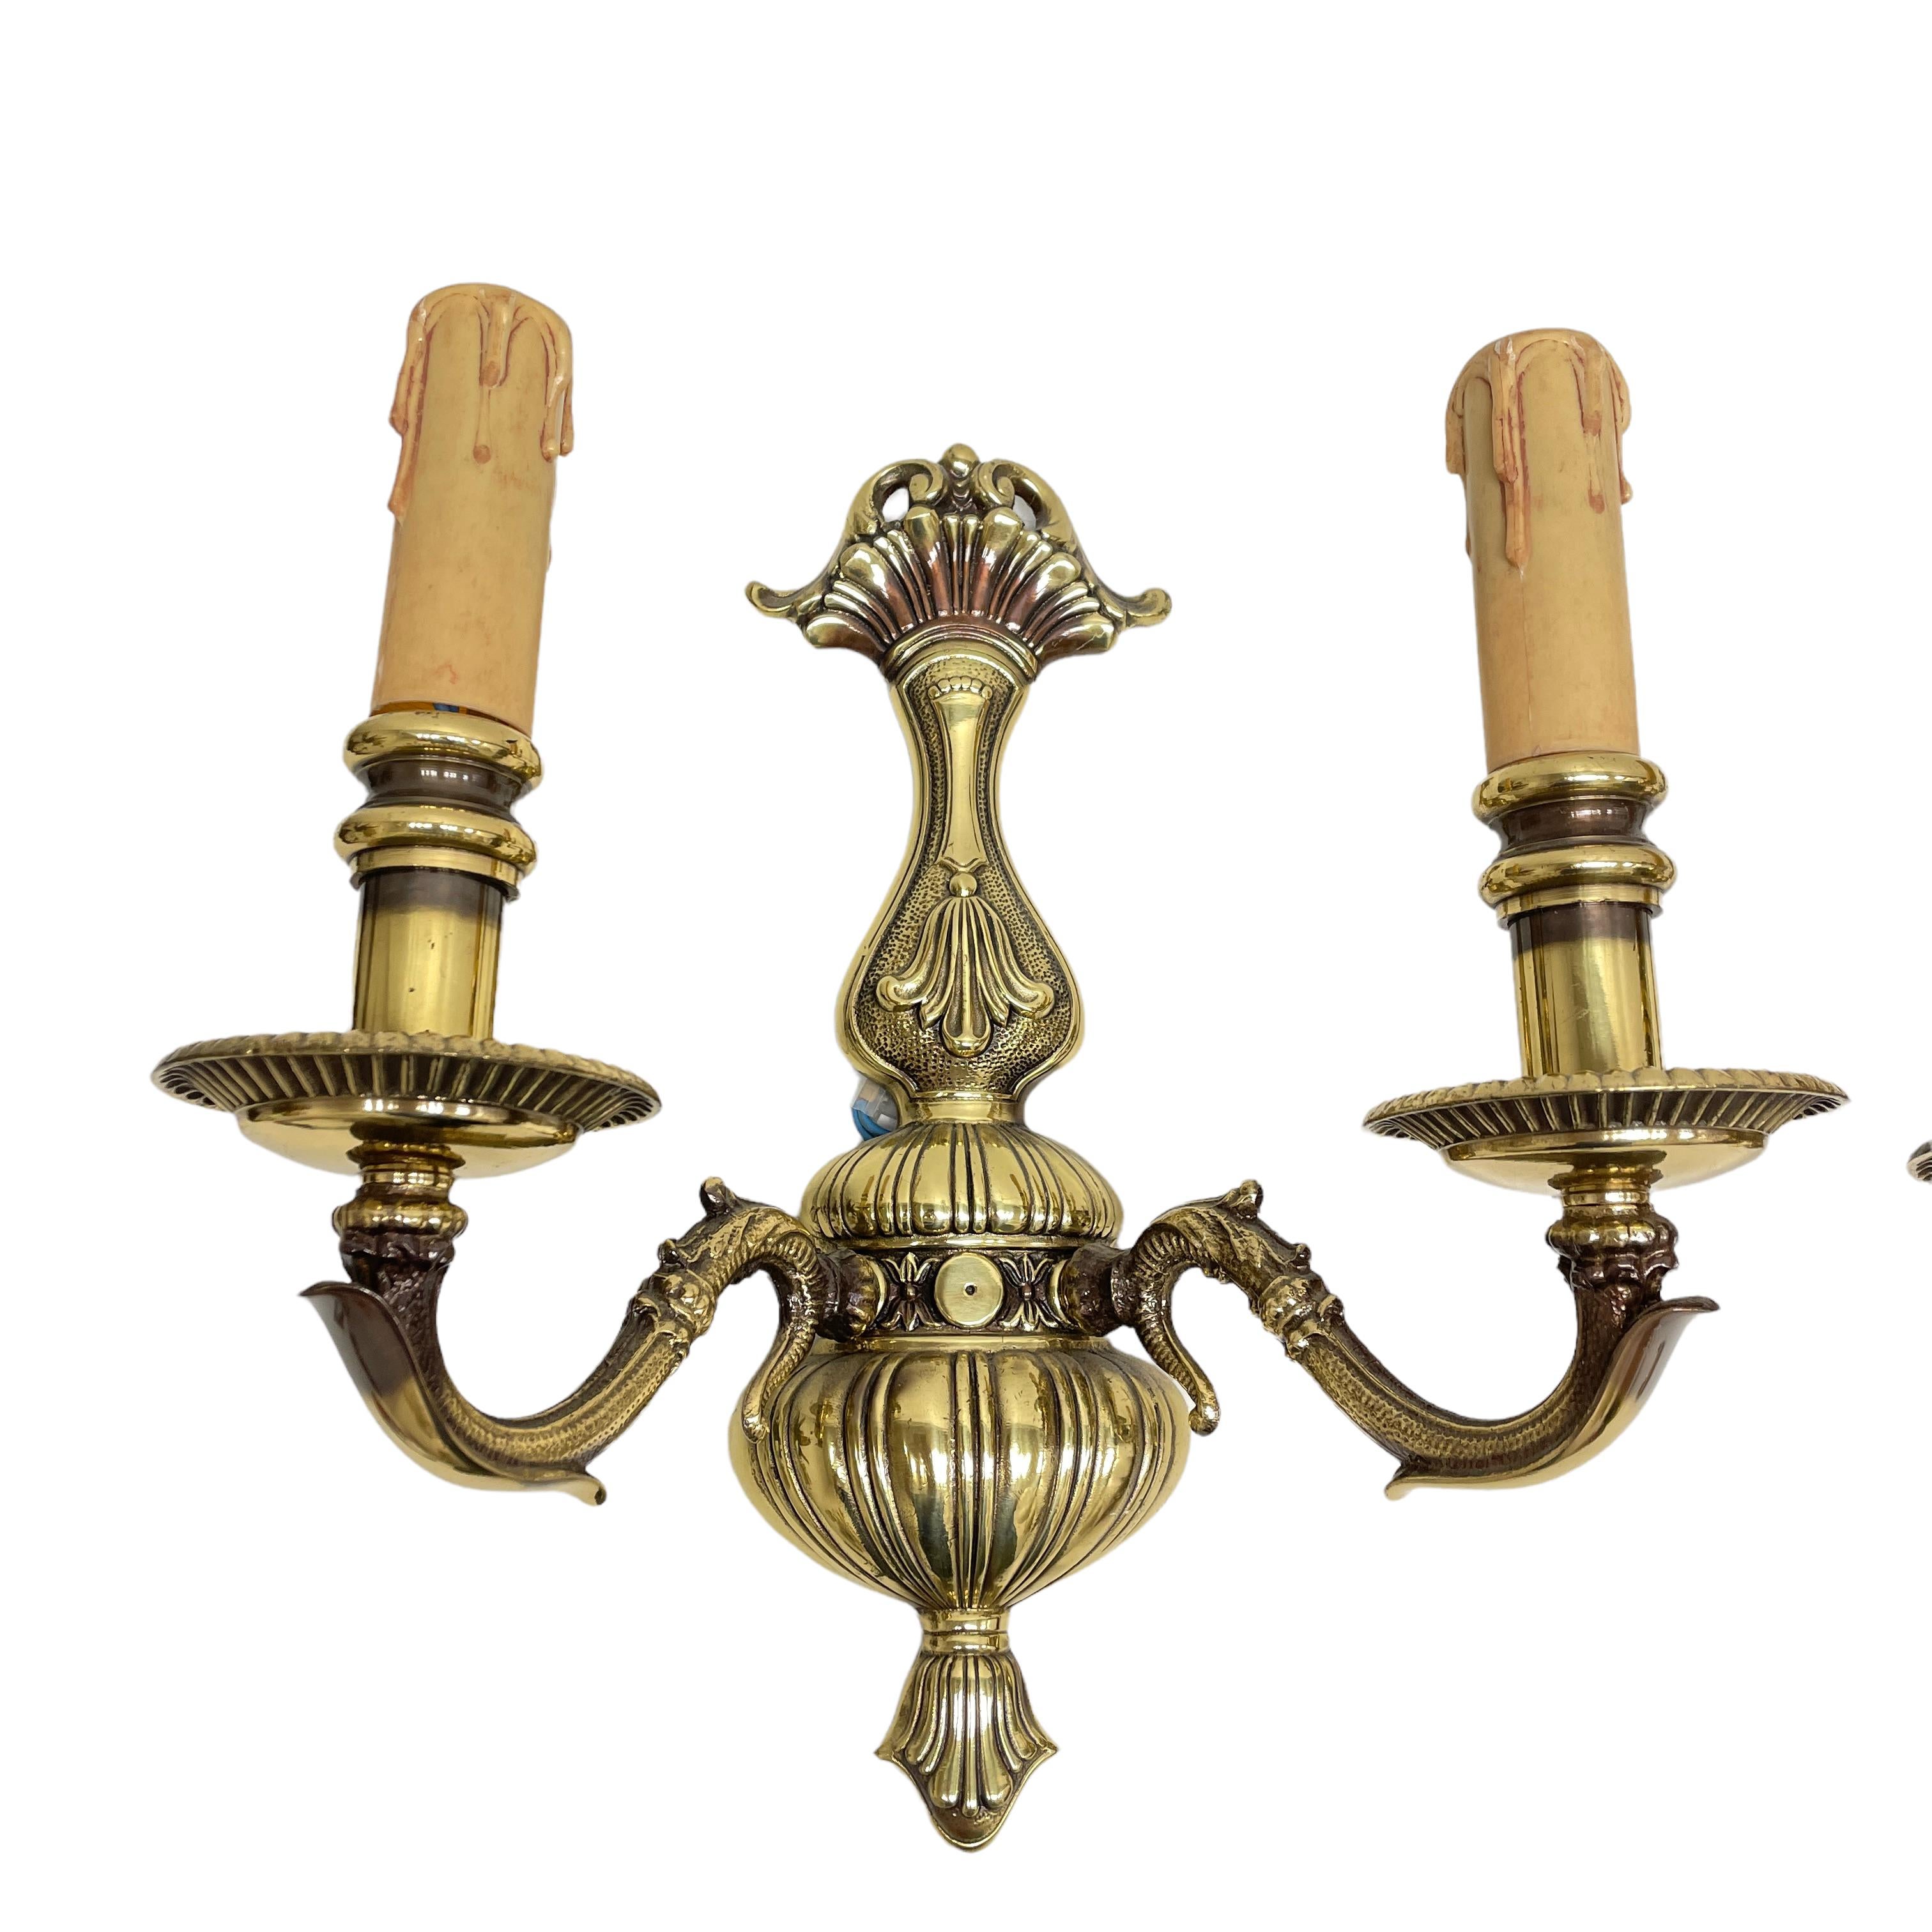 A stunning pair of heavy brass wall sconces. Each consisting of a stylish Hollywood Regency style design. Each fixture requires two European E14 / 110 Volt candelabra bulbs, each bulb up to 40 watts. A nice addition to any room.